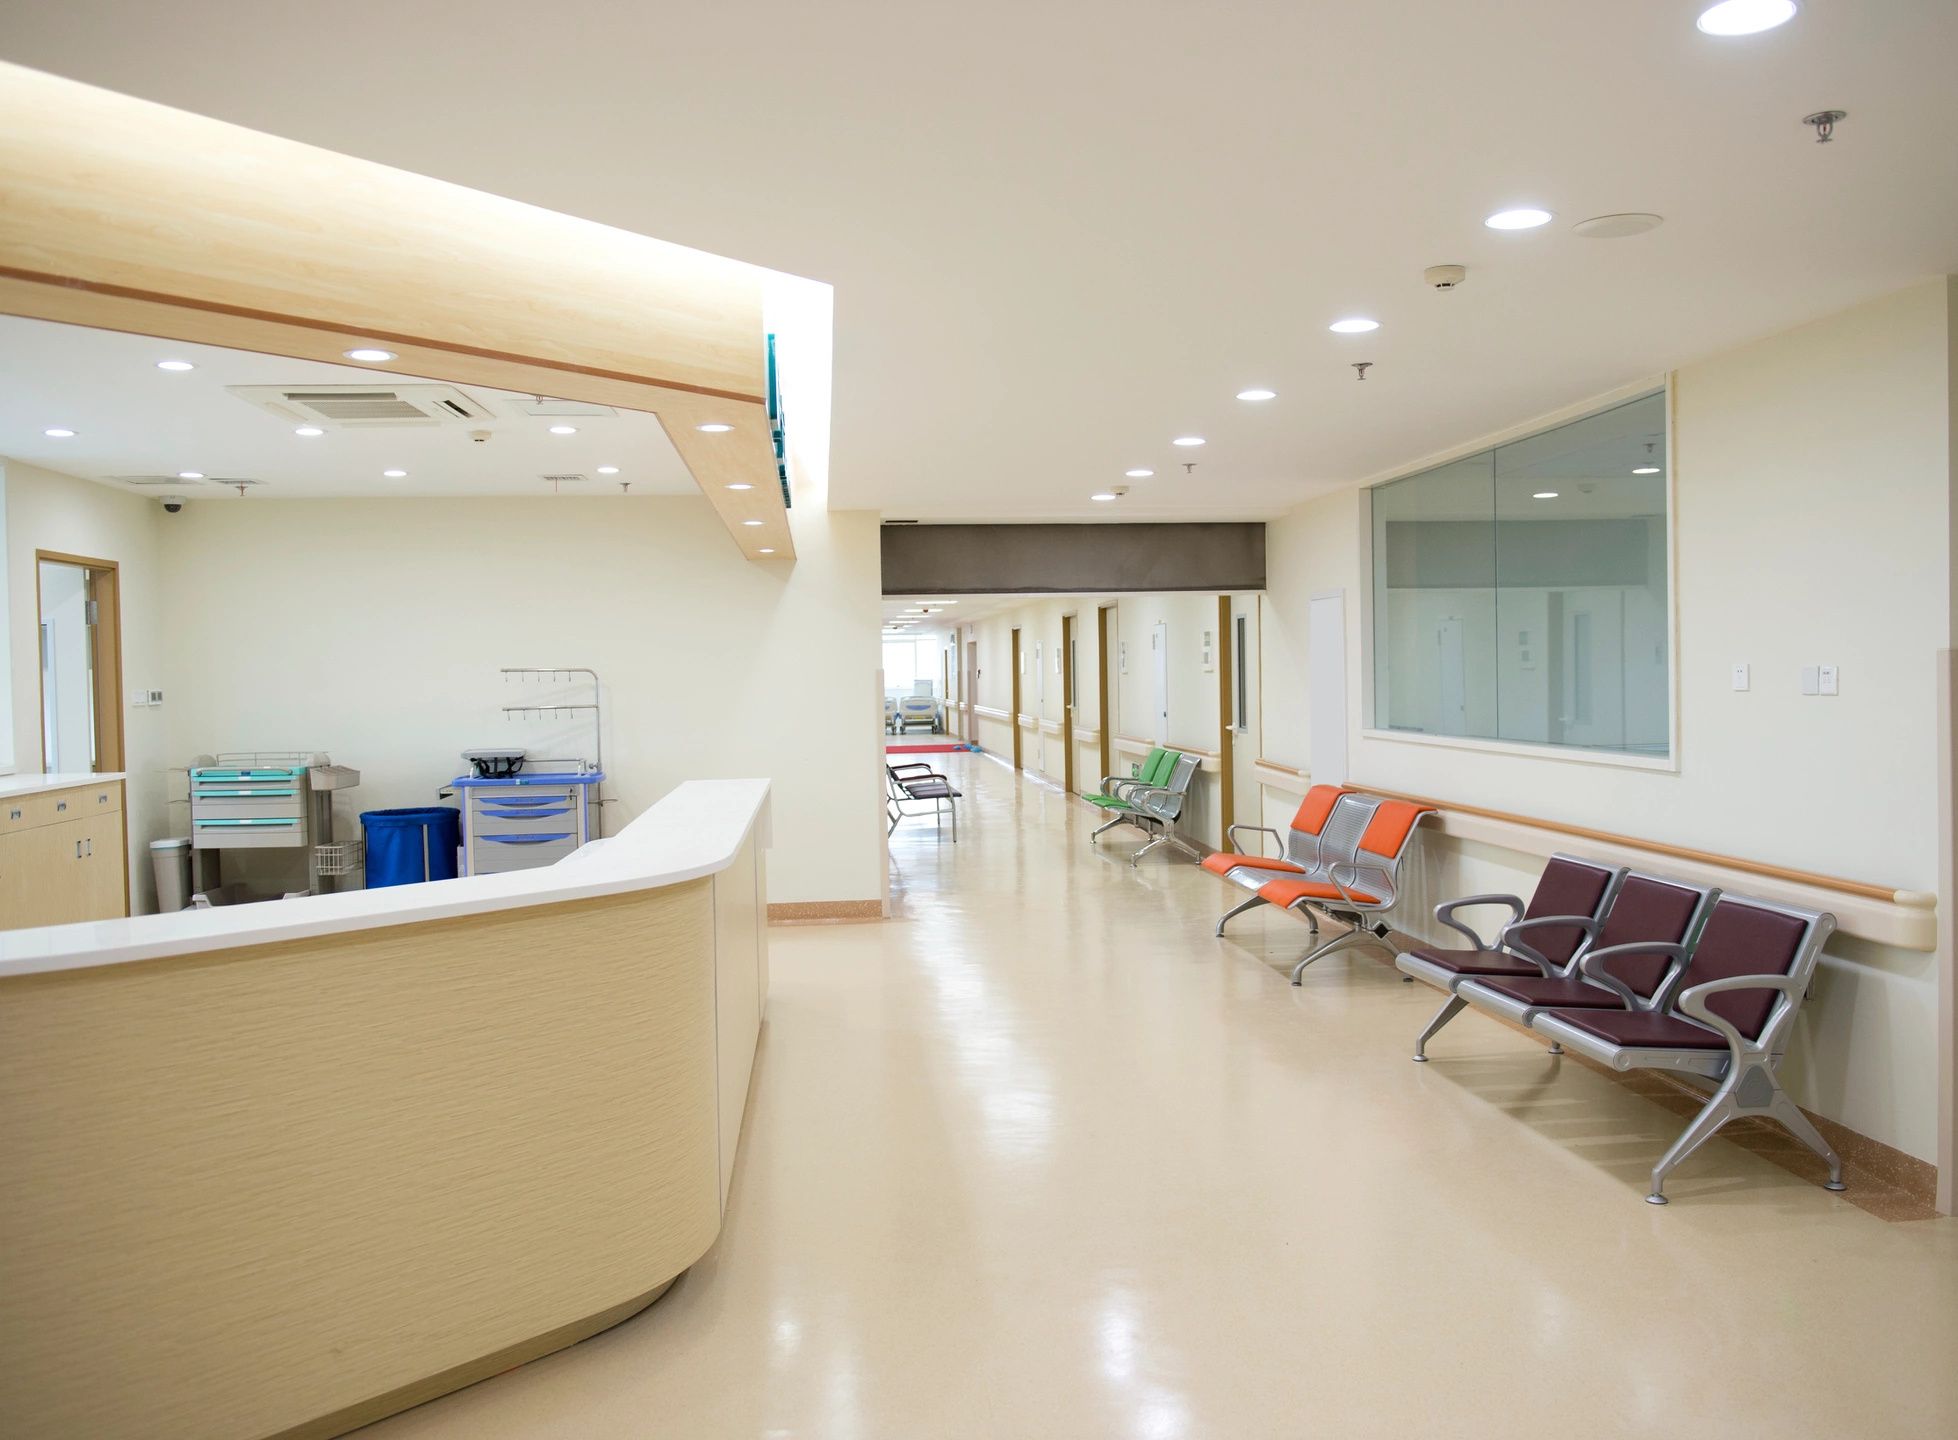 A hospital waiting room with chairs and a reception desk.